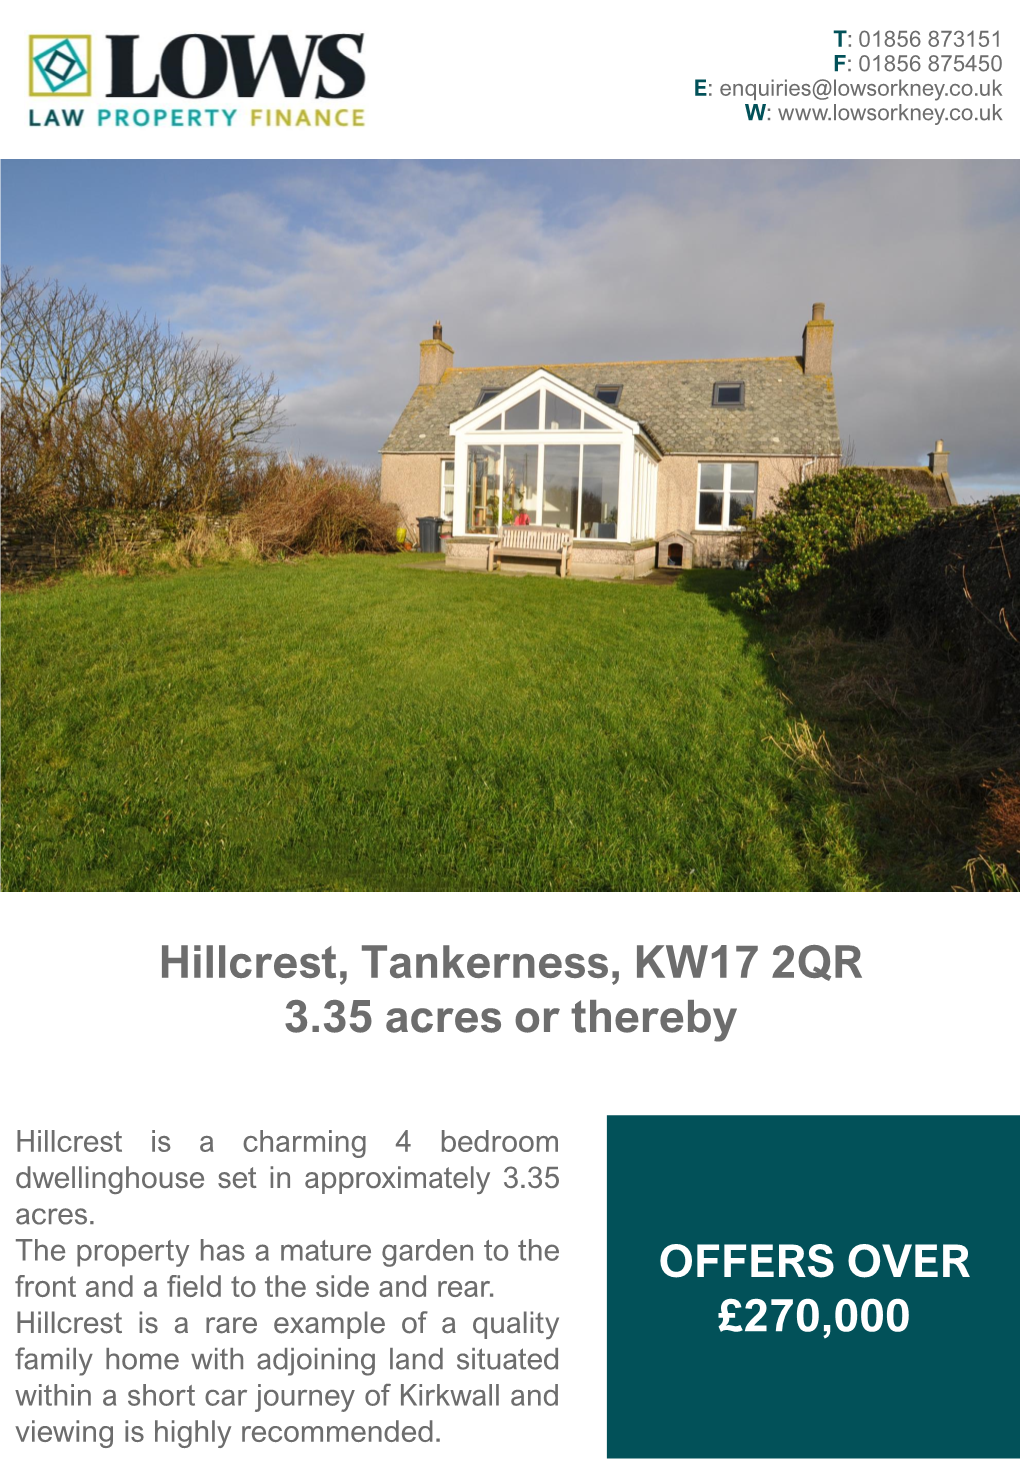 Hillcrest, Tankerness, KW17 2QR 3.35 Acres Or Thereby